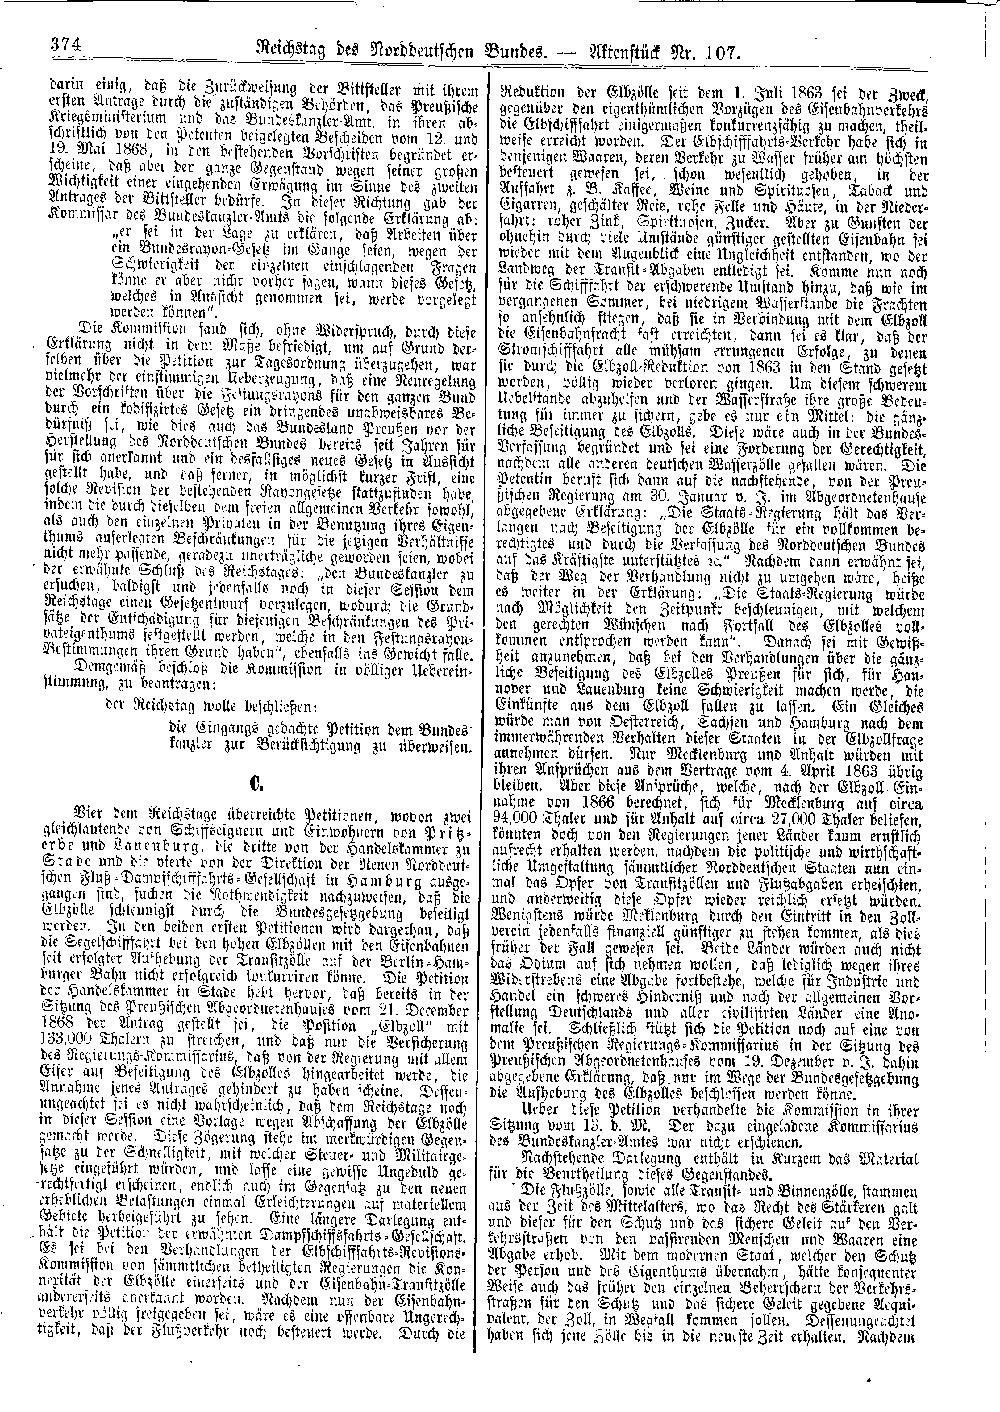 Scan of page 374